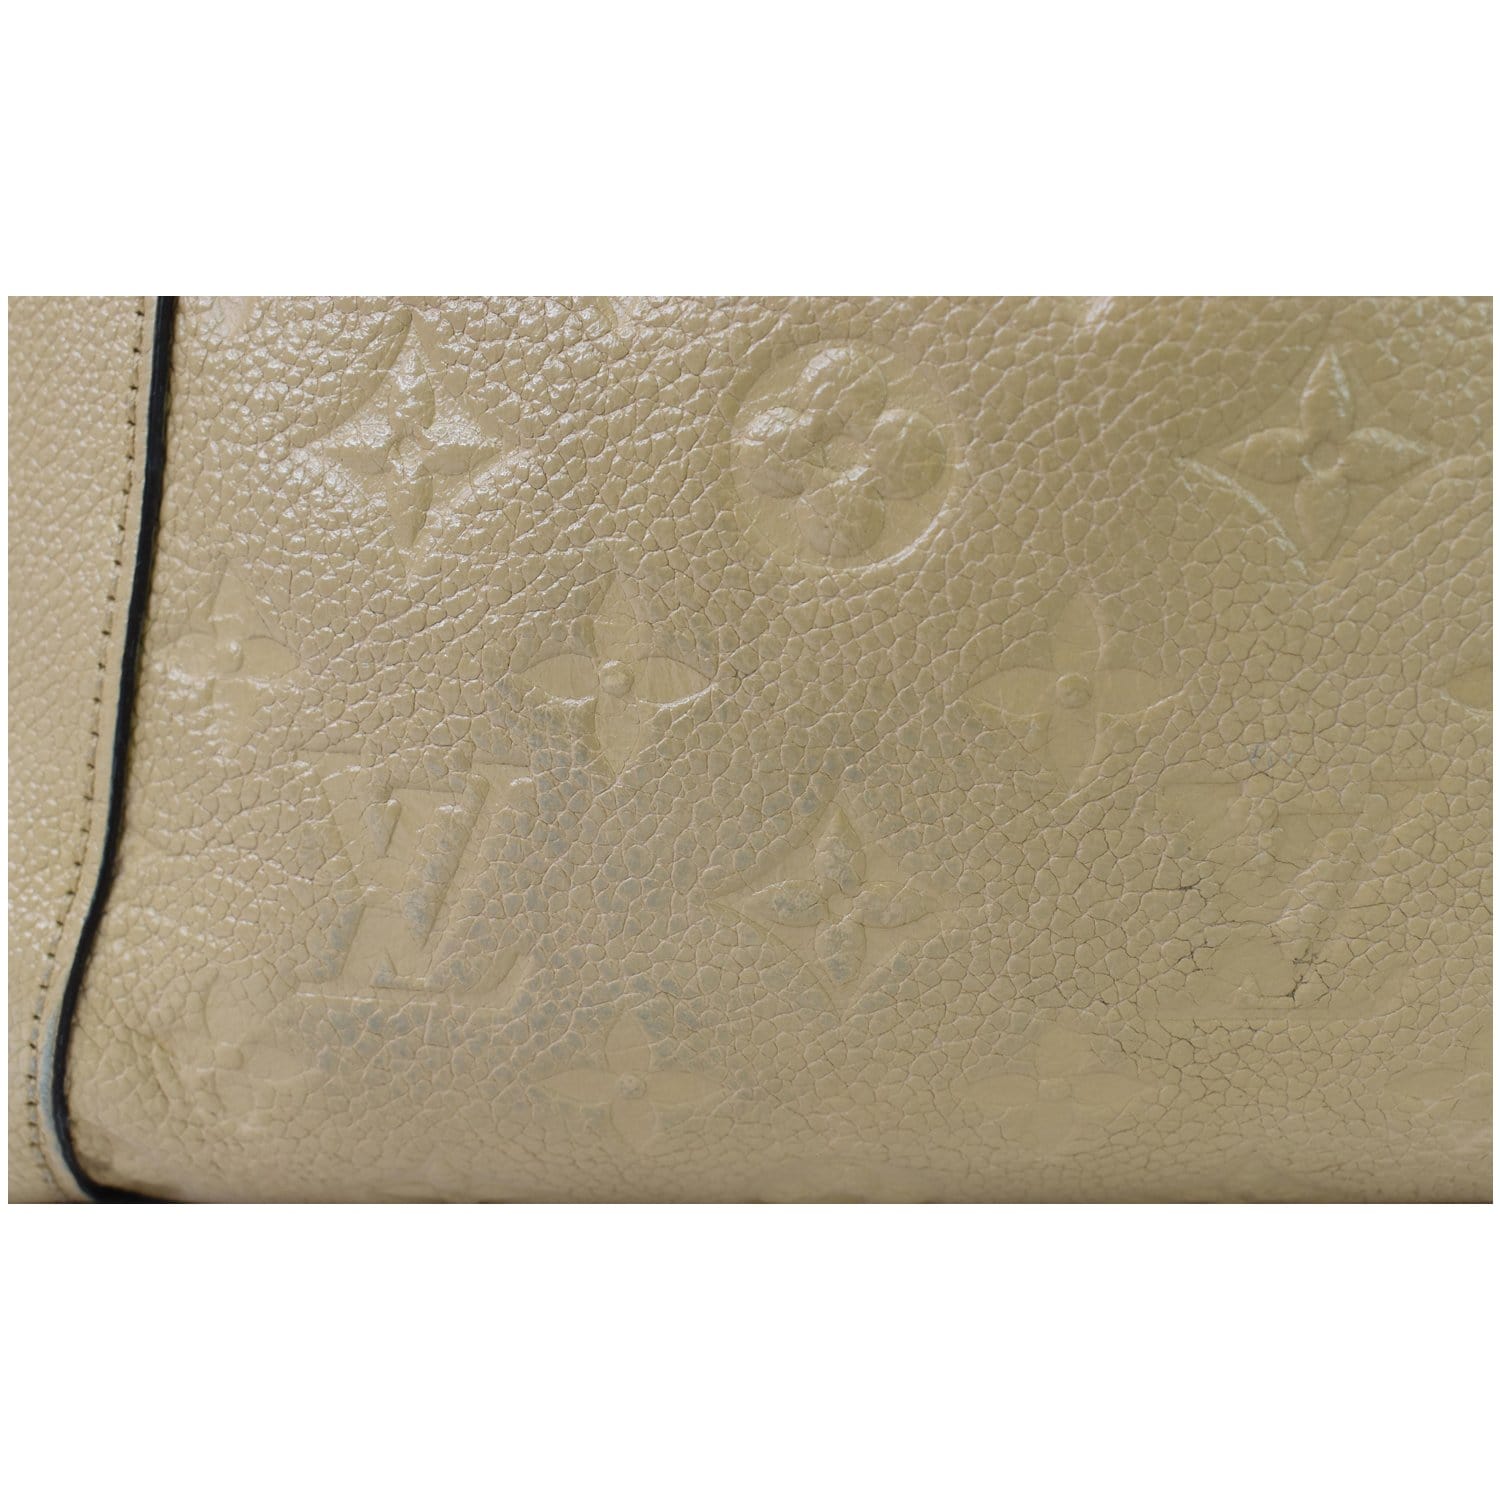 Louis Vuitton Bagatelle - 2 For Sale on 1stDibs